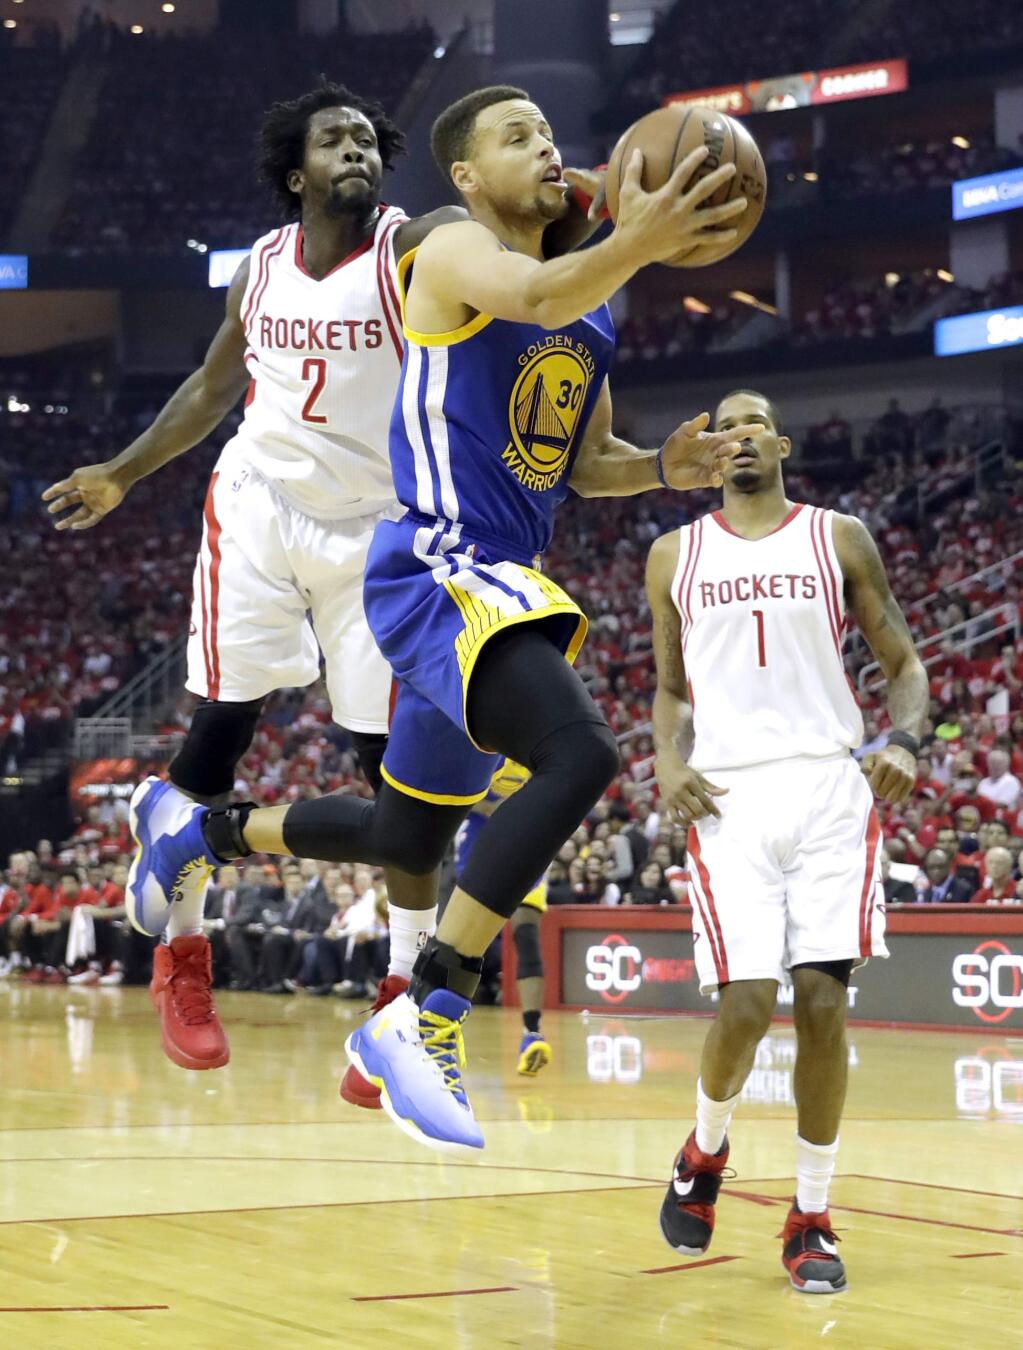 Golden State Warriors' Stephen Curry, center, is fouled on his way to the basket by by Houston Rockets' Patrick Beverley, left, as Houston's Trevor Ariza watches during the first half in Game 4 of a first-round NBA basketball playoff series, Sunday, April 24, 2016, in Houston. (AP Photo/David J. Phillip)